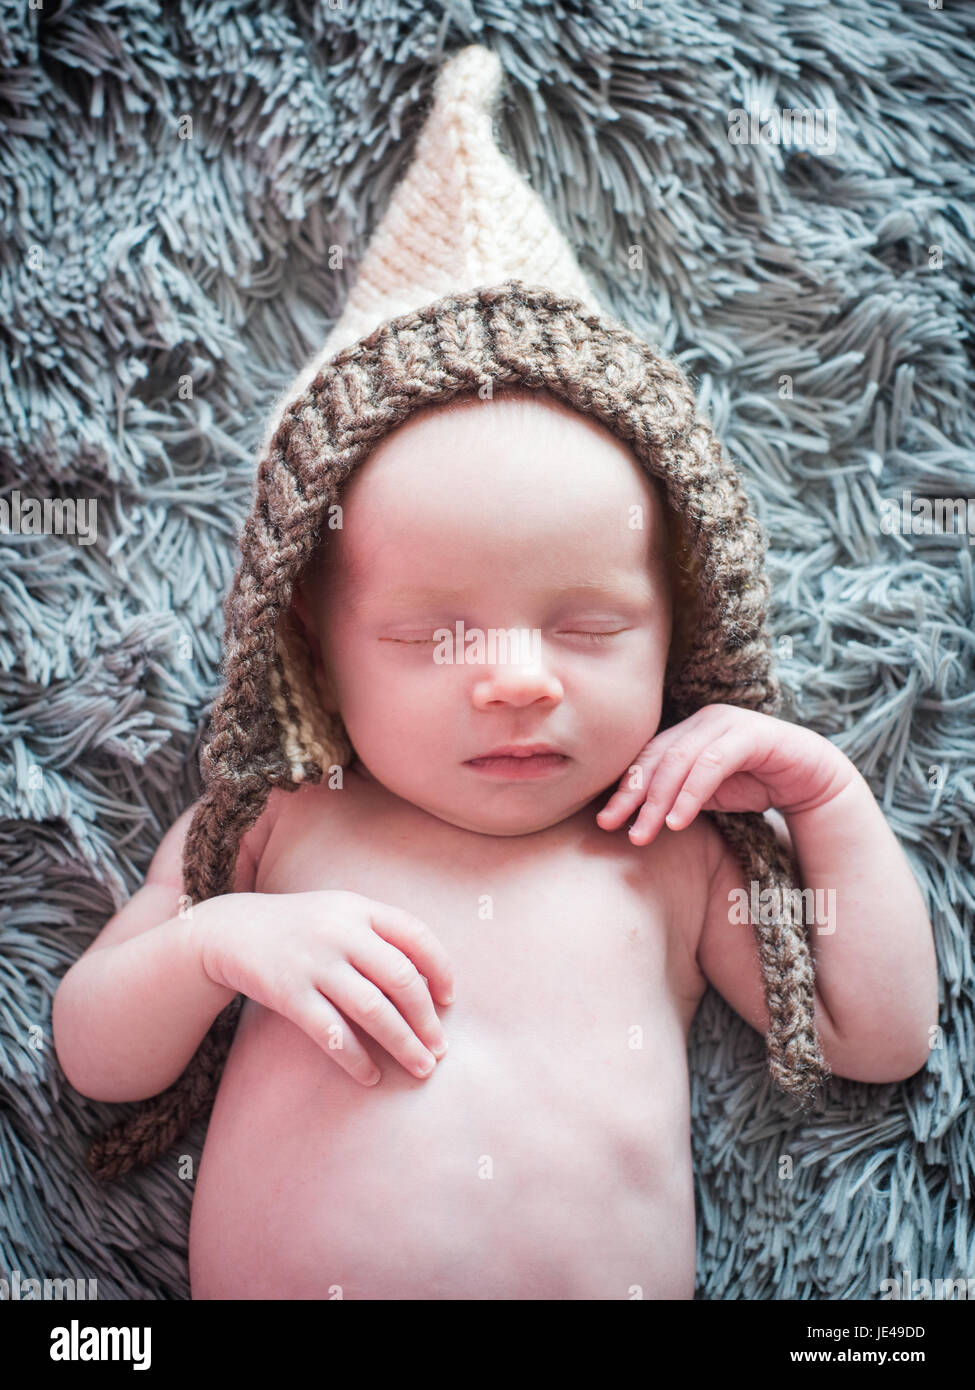 Newborn baby sleeps in a knitted hat Stock Photo